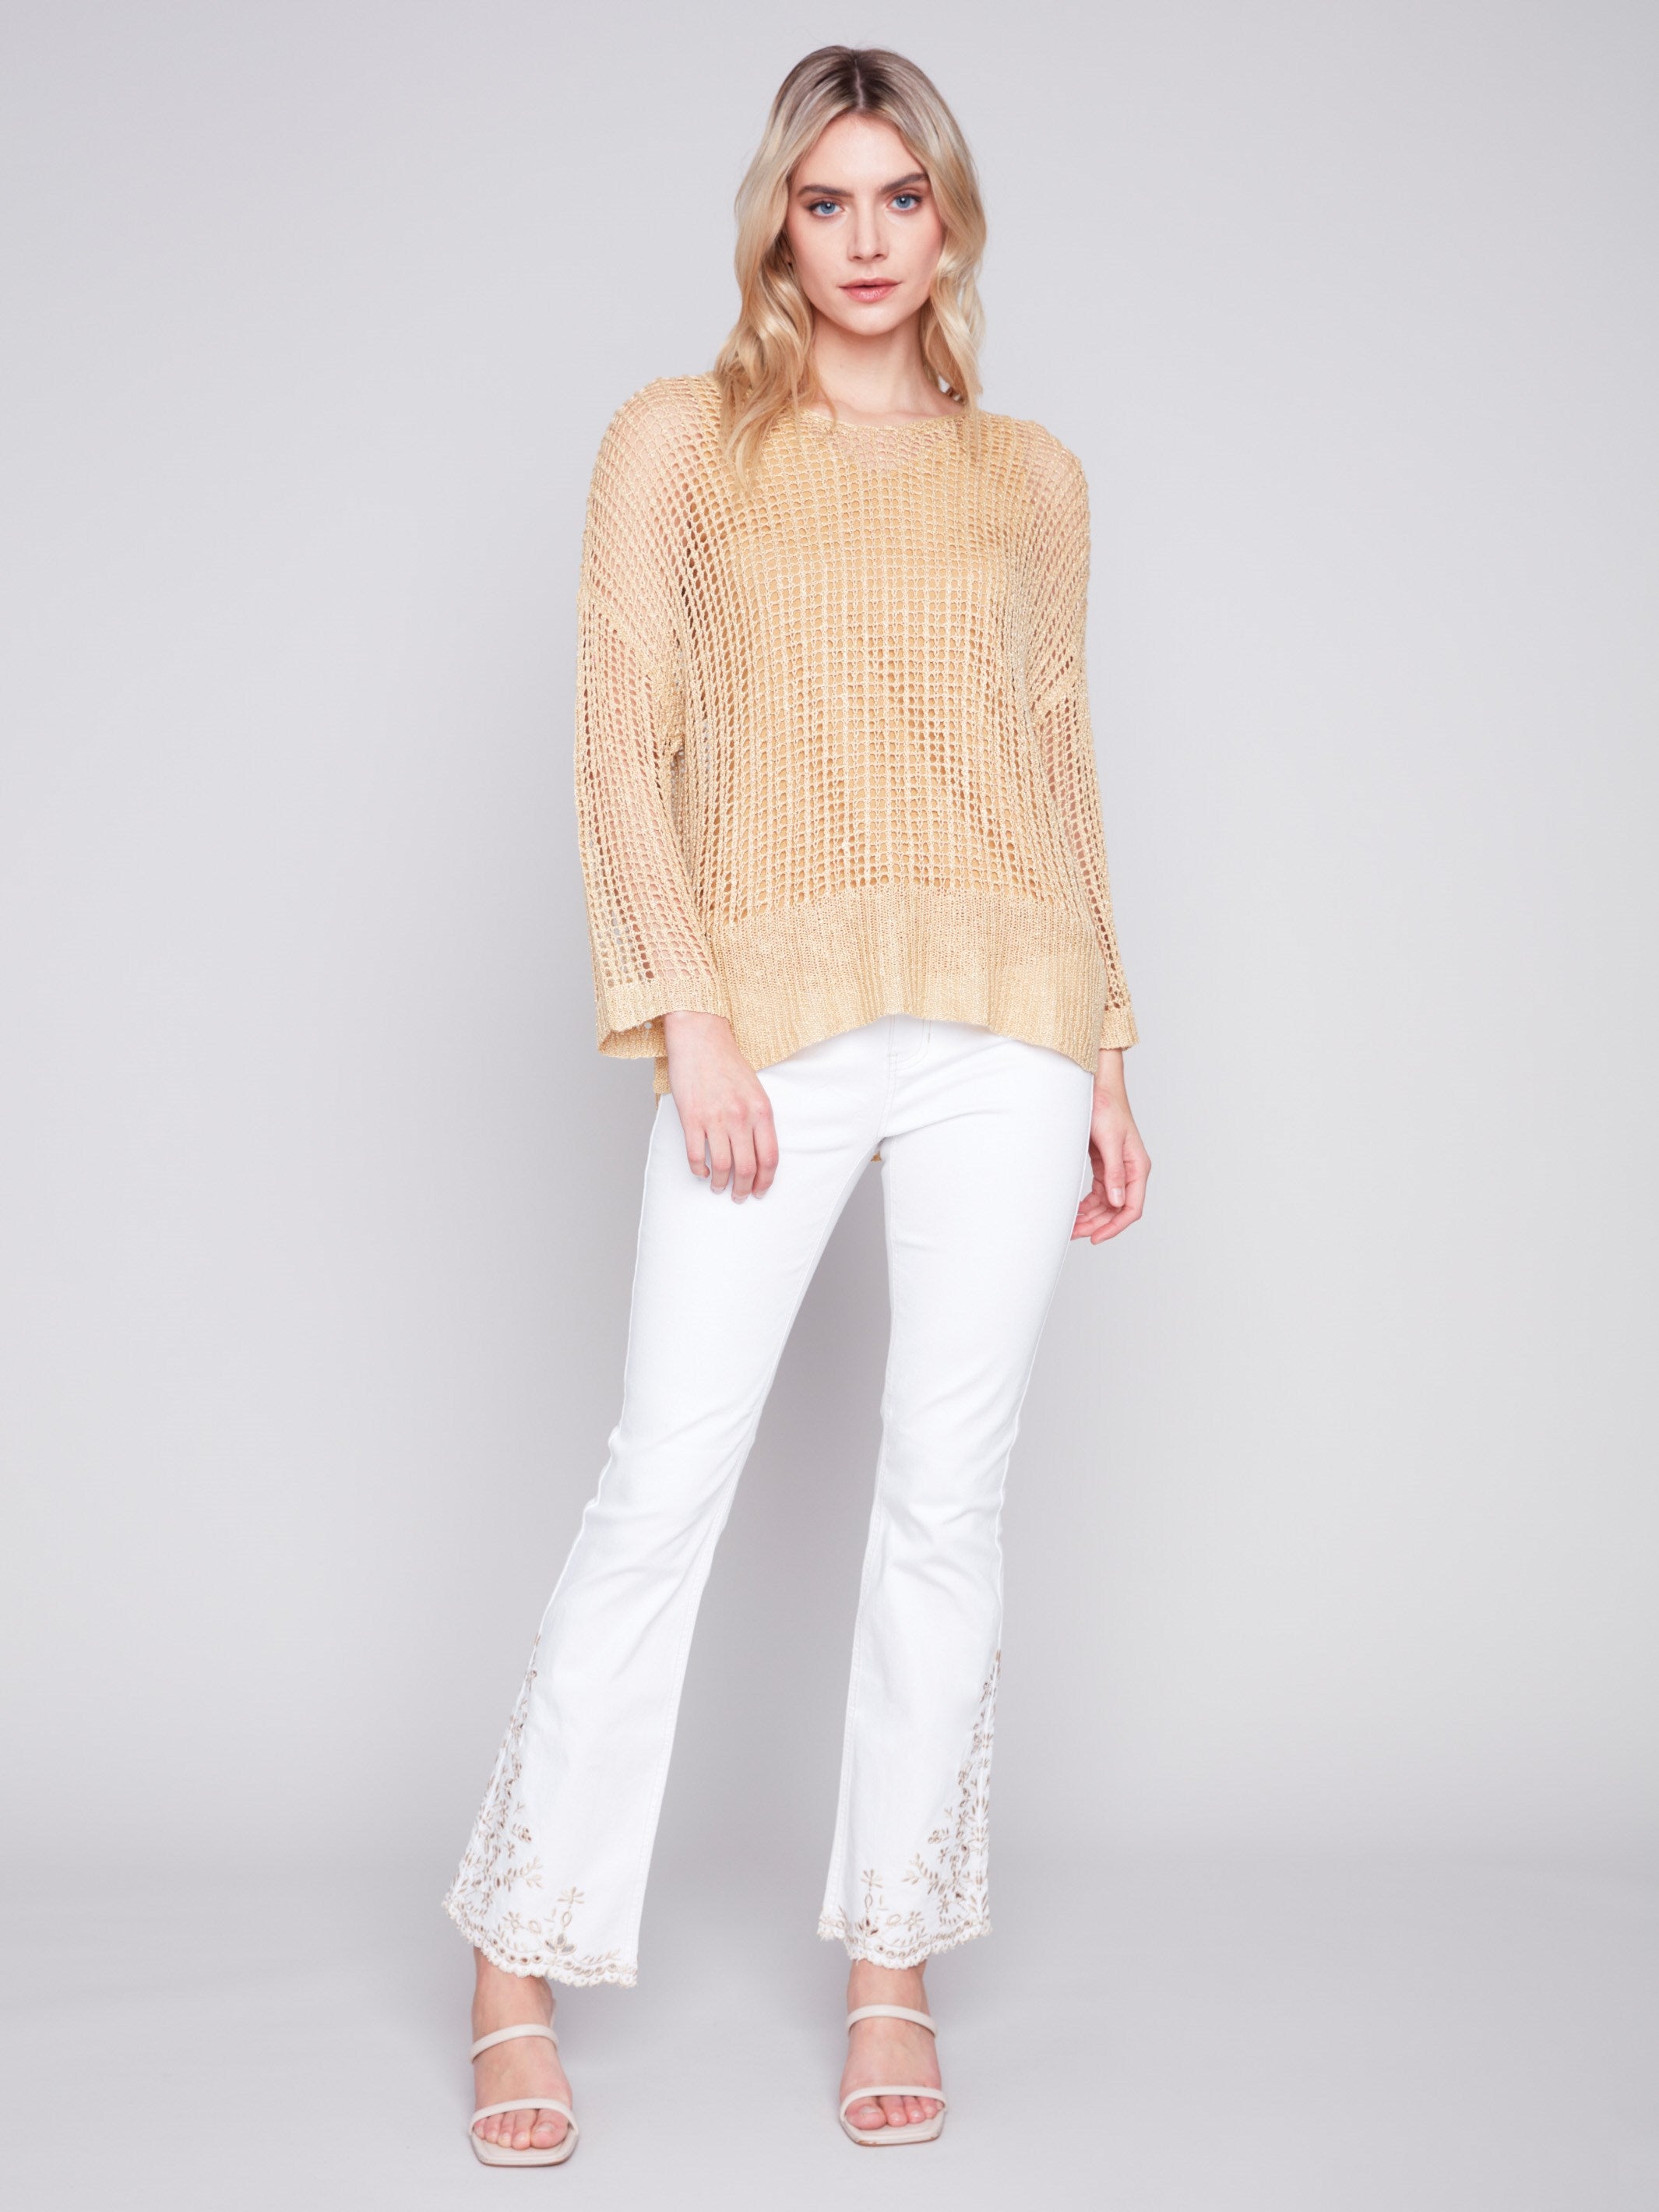 Fishnet Crochet Sweater - Gold - Charlie B Collection Canada - Image 3